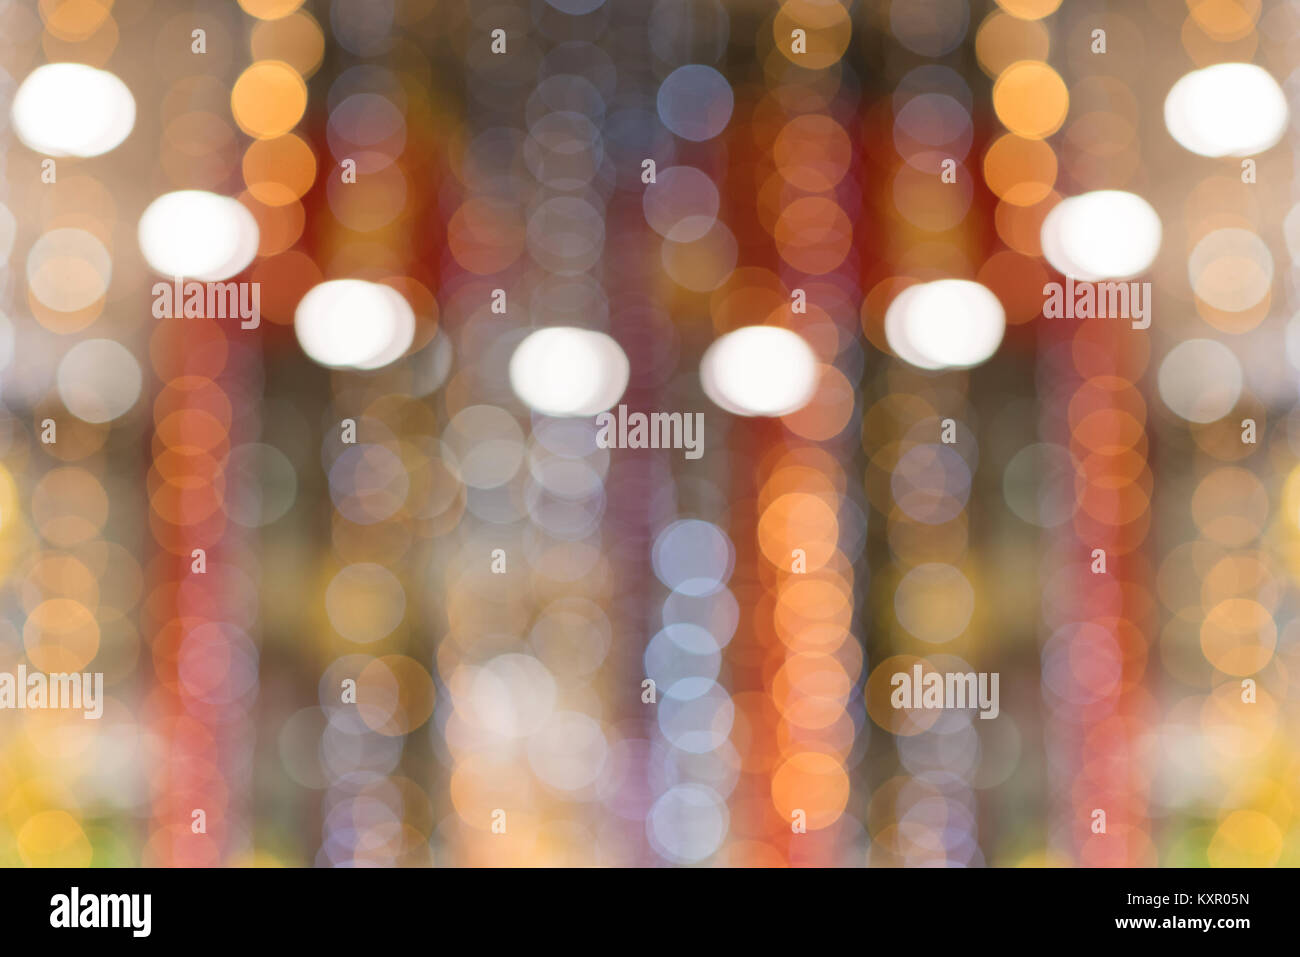 Colorful bokeh background with circles, pattern for designer Stock Photo